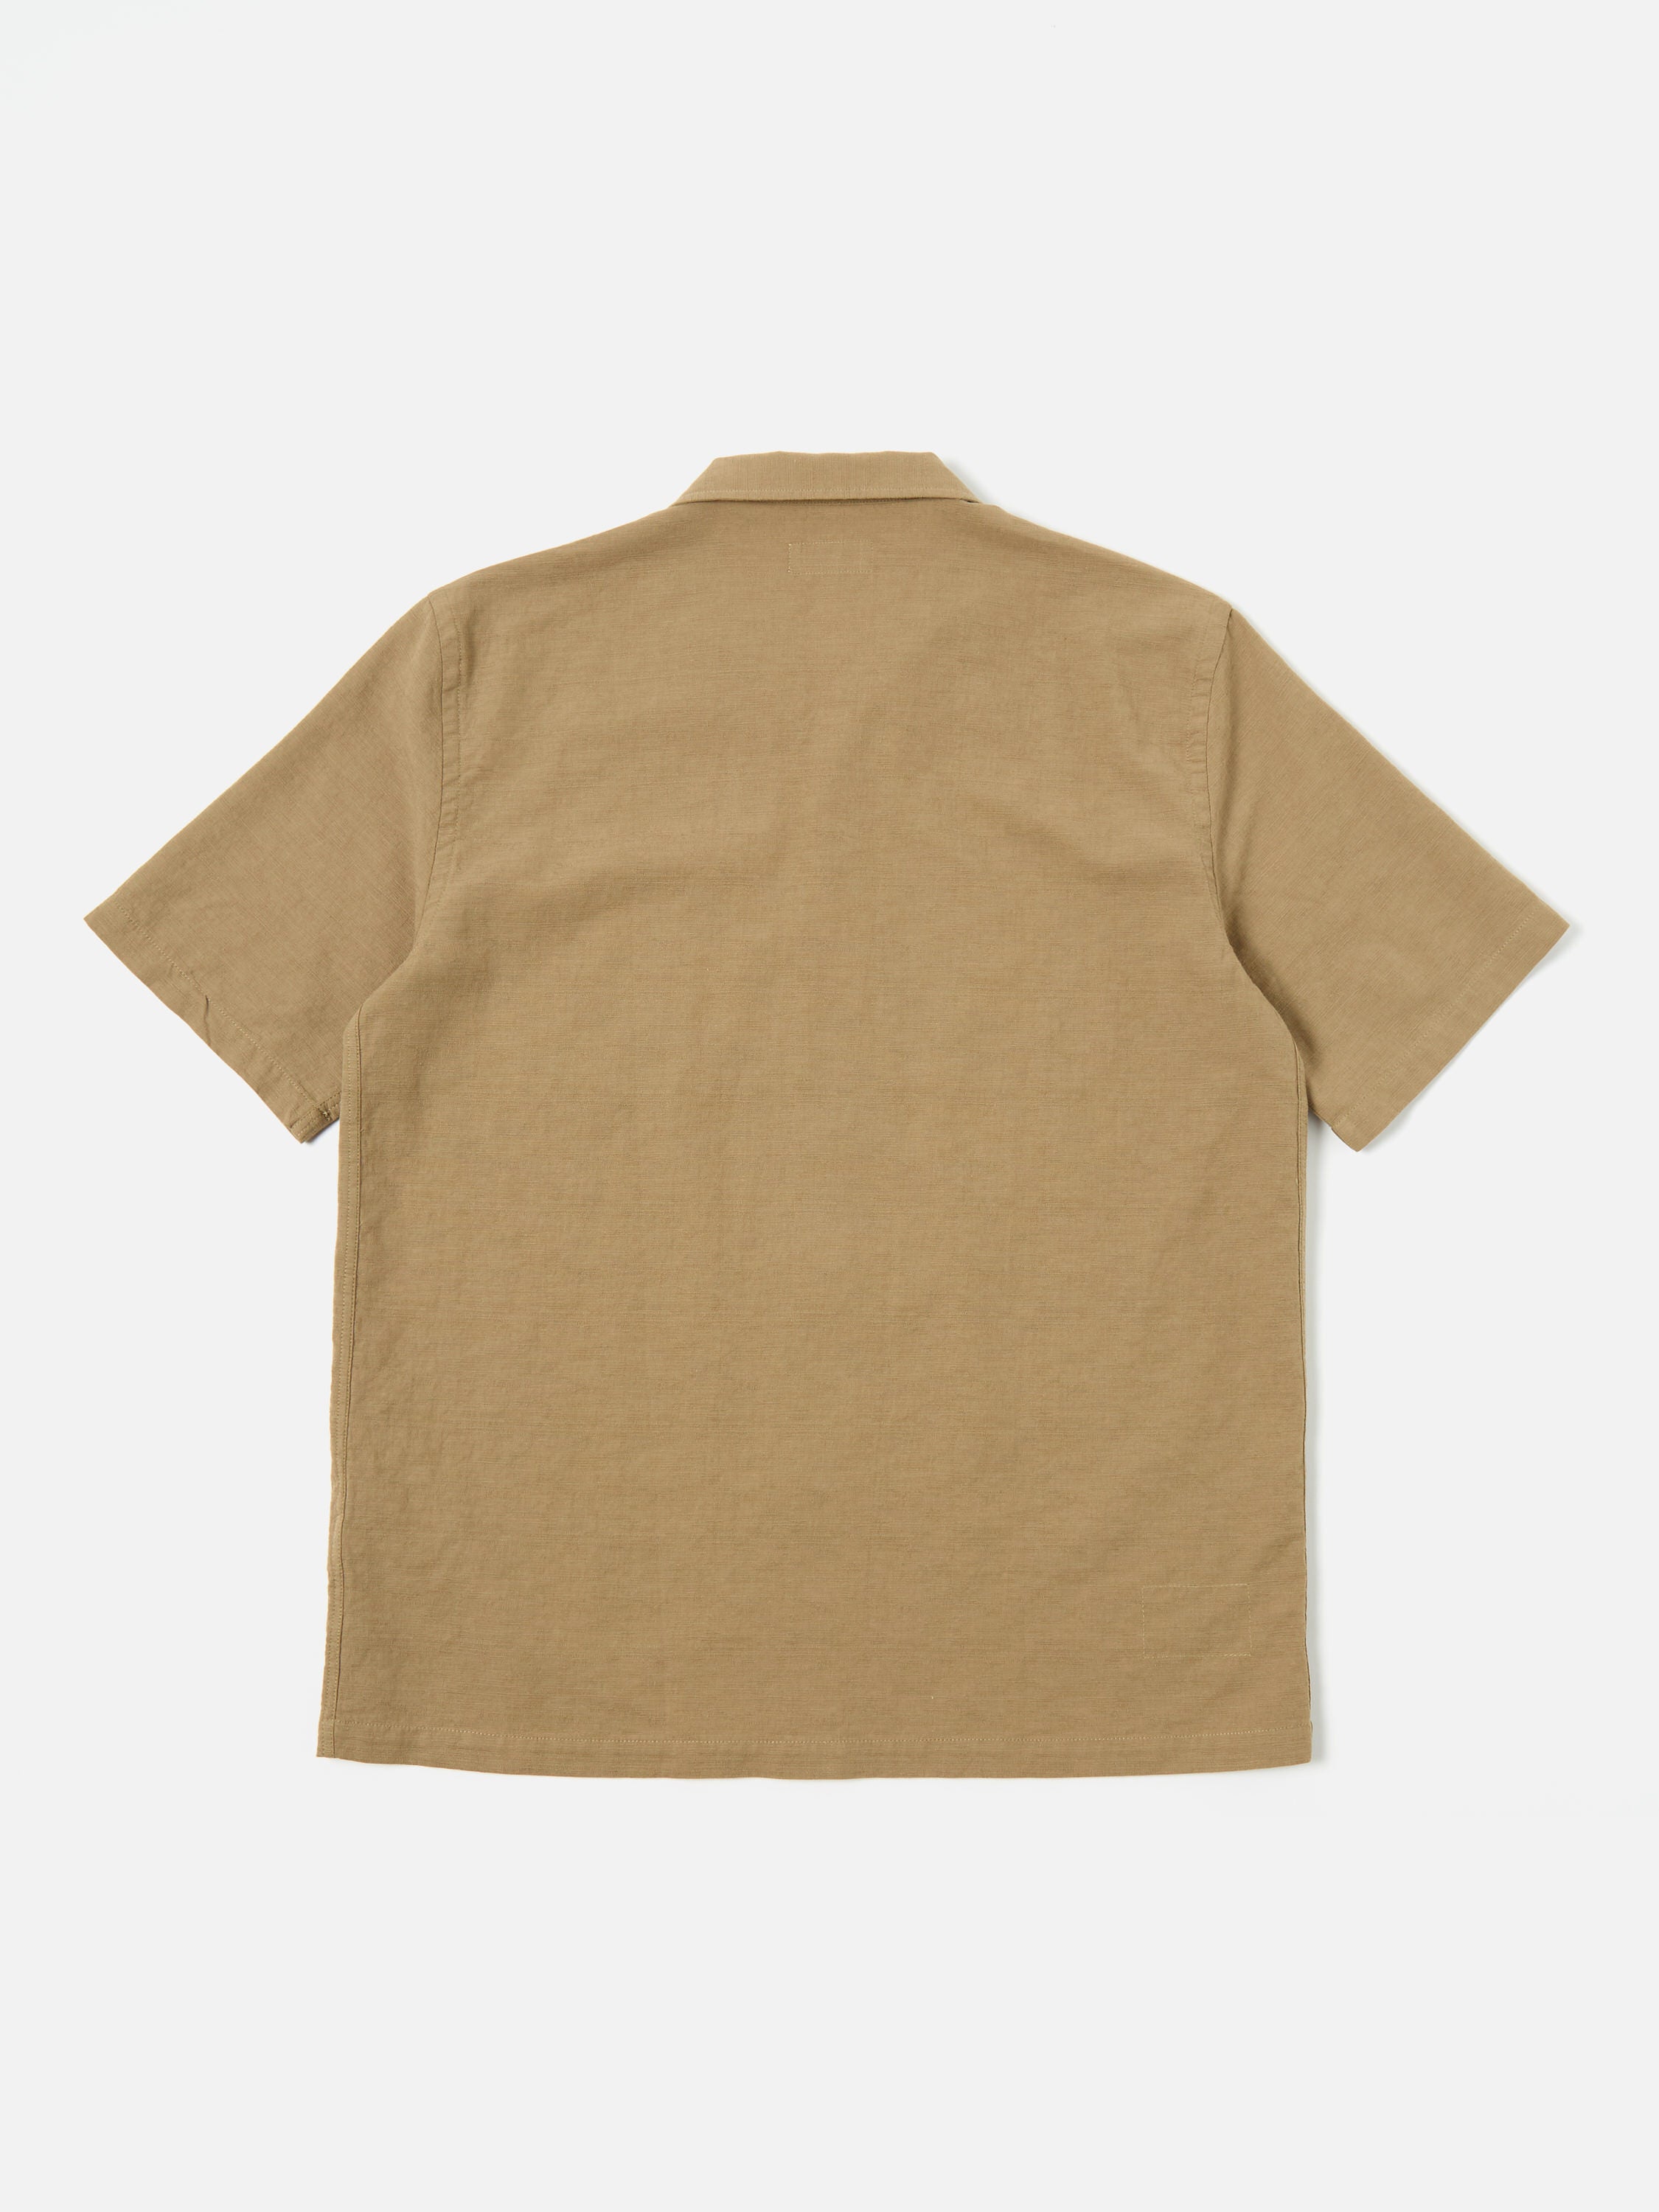 Universal Works Road Shirt in Olive Kamura Cotton